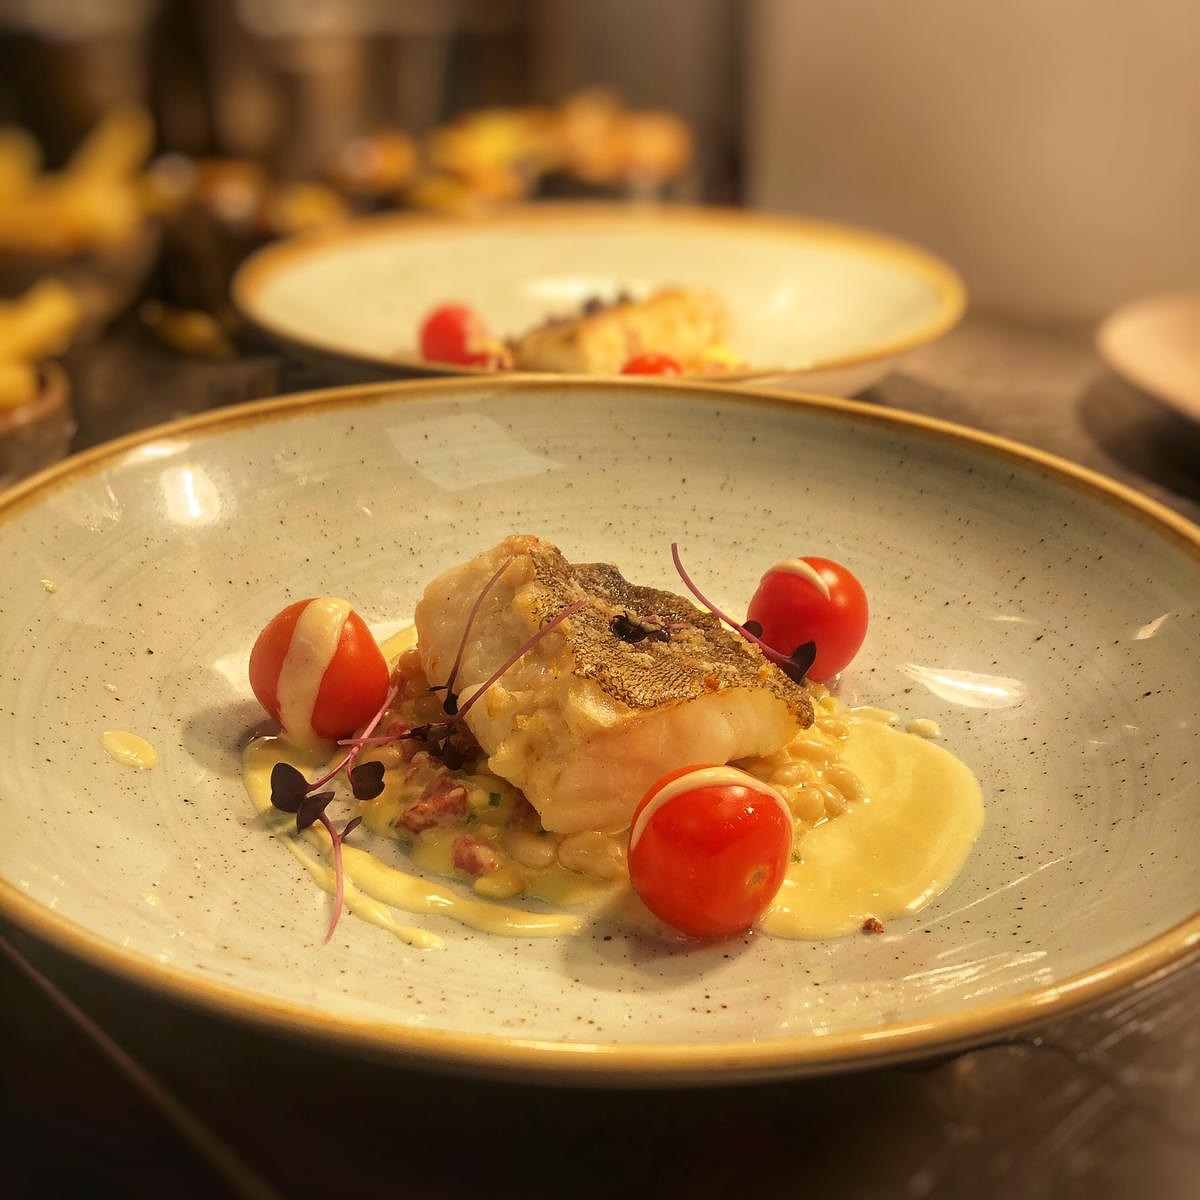 One of our beautiful dishes from Lils A La Carte menu ; Cod Accompanied by Coco Beans, Celeriac, Morteau Sausage & Verjus Sauce 😍😍 #avalonhousehotel #localsuppliers #localproduce #freshingredients #lilsrestaurant